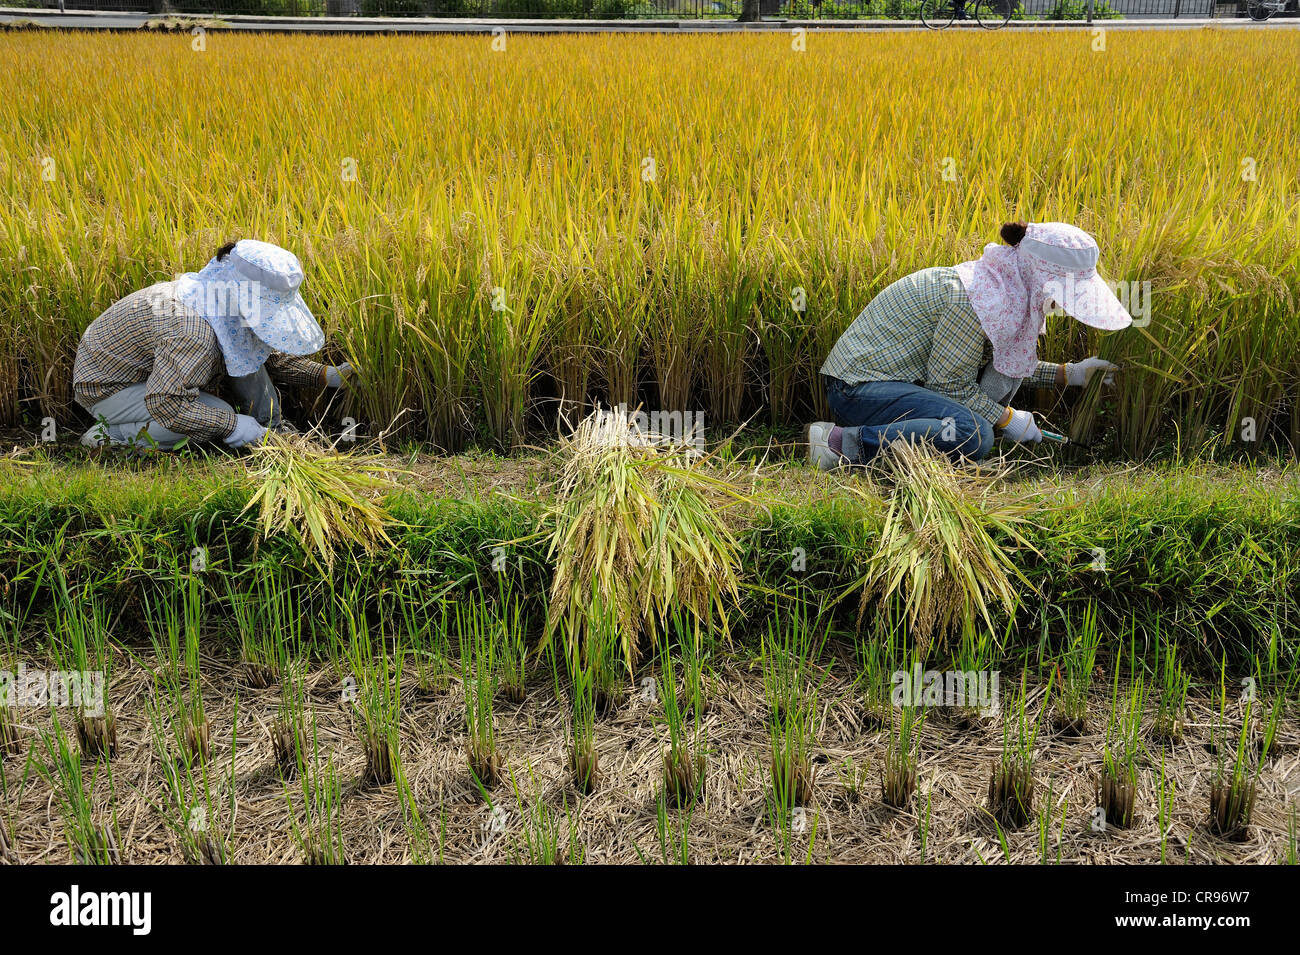 Japanese women wearing large caps and gloves harvesting rice with sickles in Iwakura, near Kyoto, Japan, Asia Stock Photo